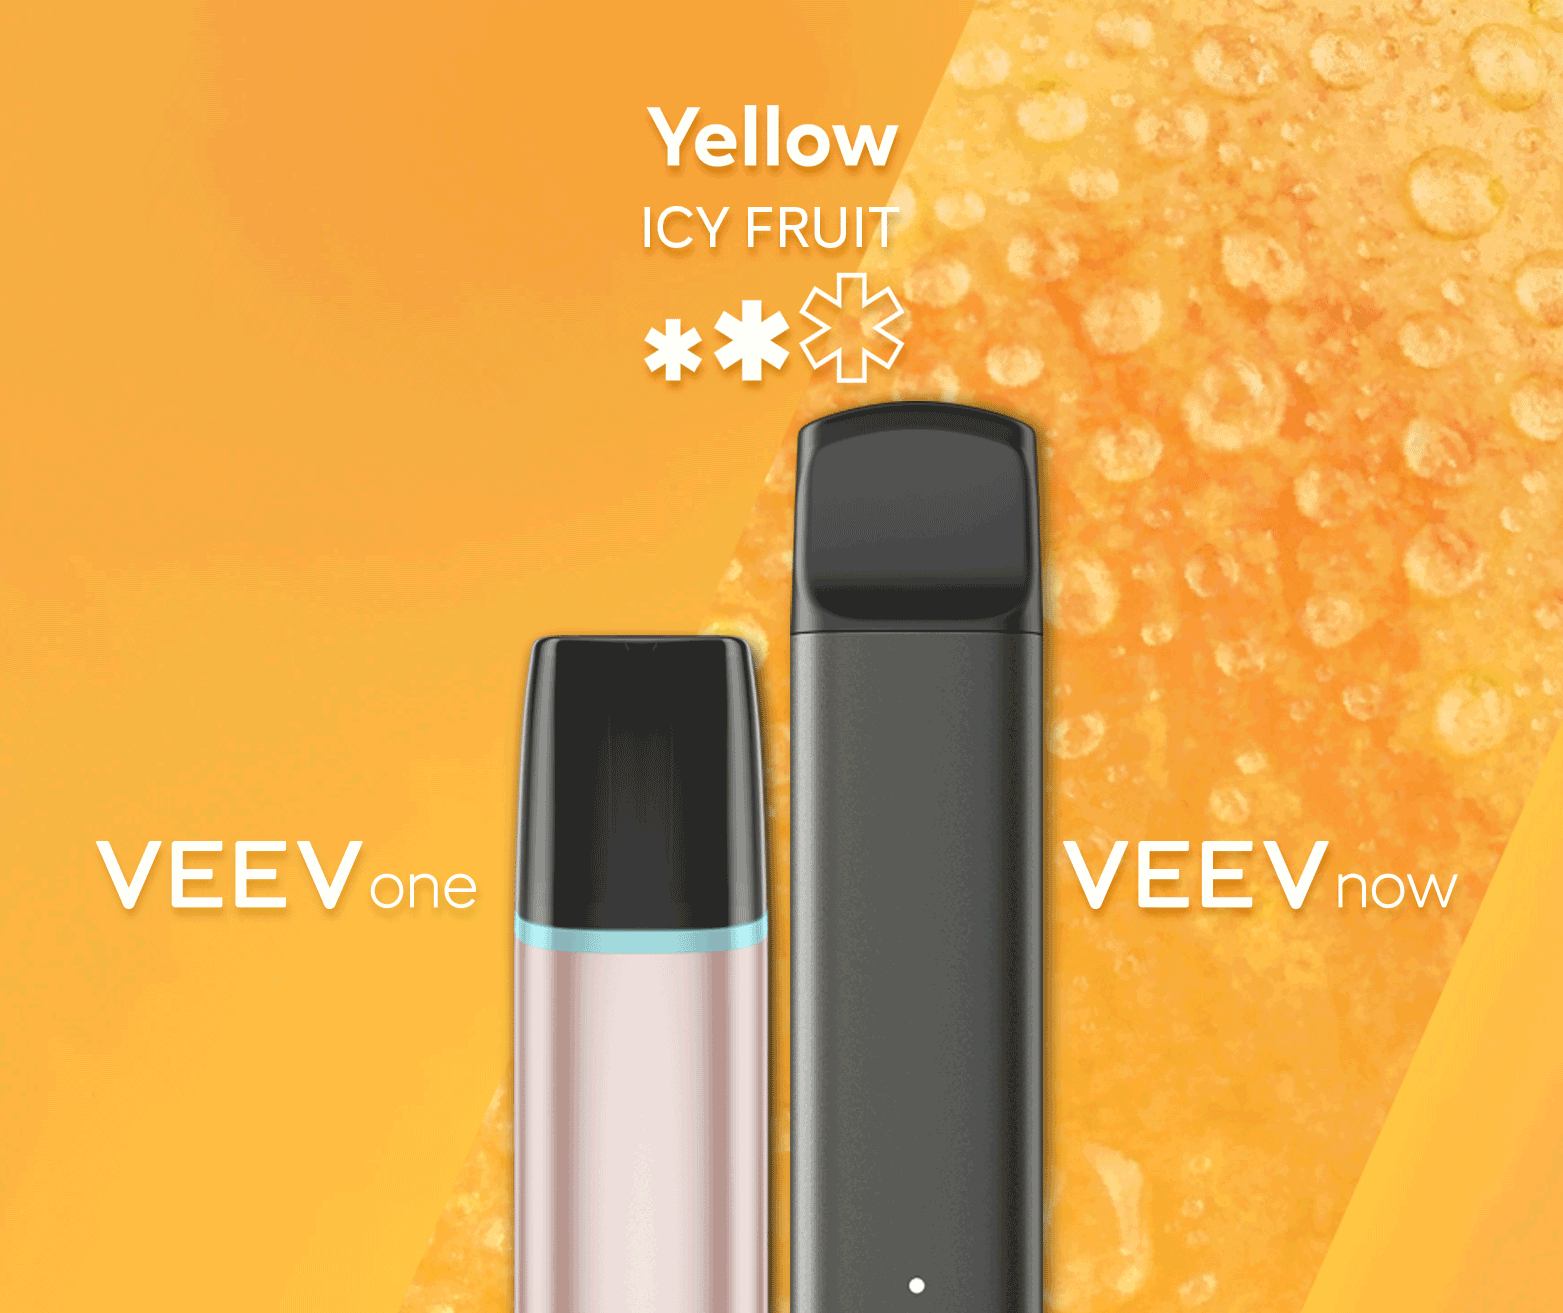 A VEEV ONE pod device and VEEV NOW disposable, both in Yellow flavour.